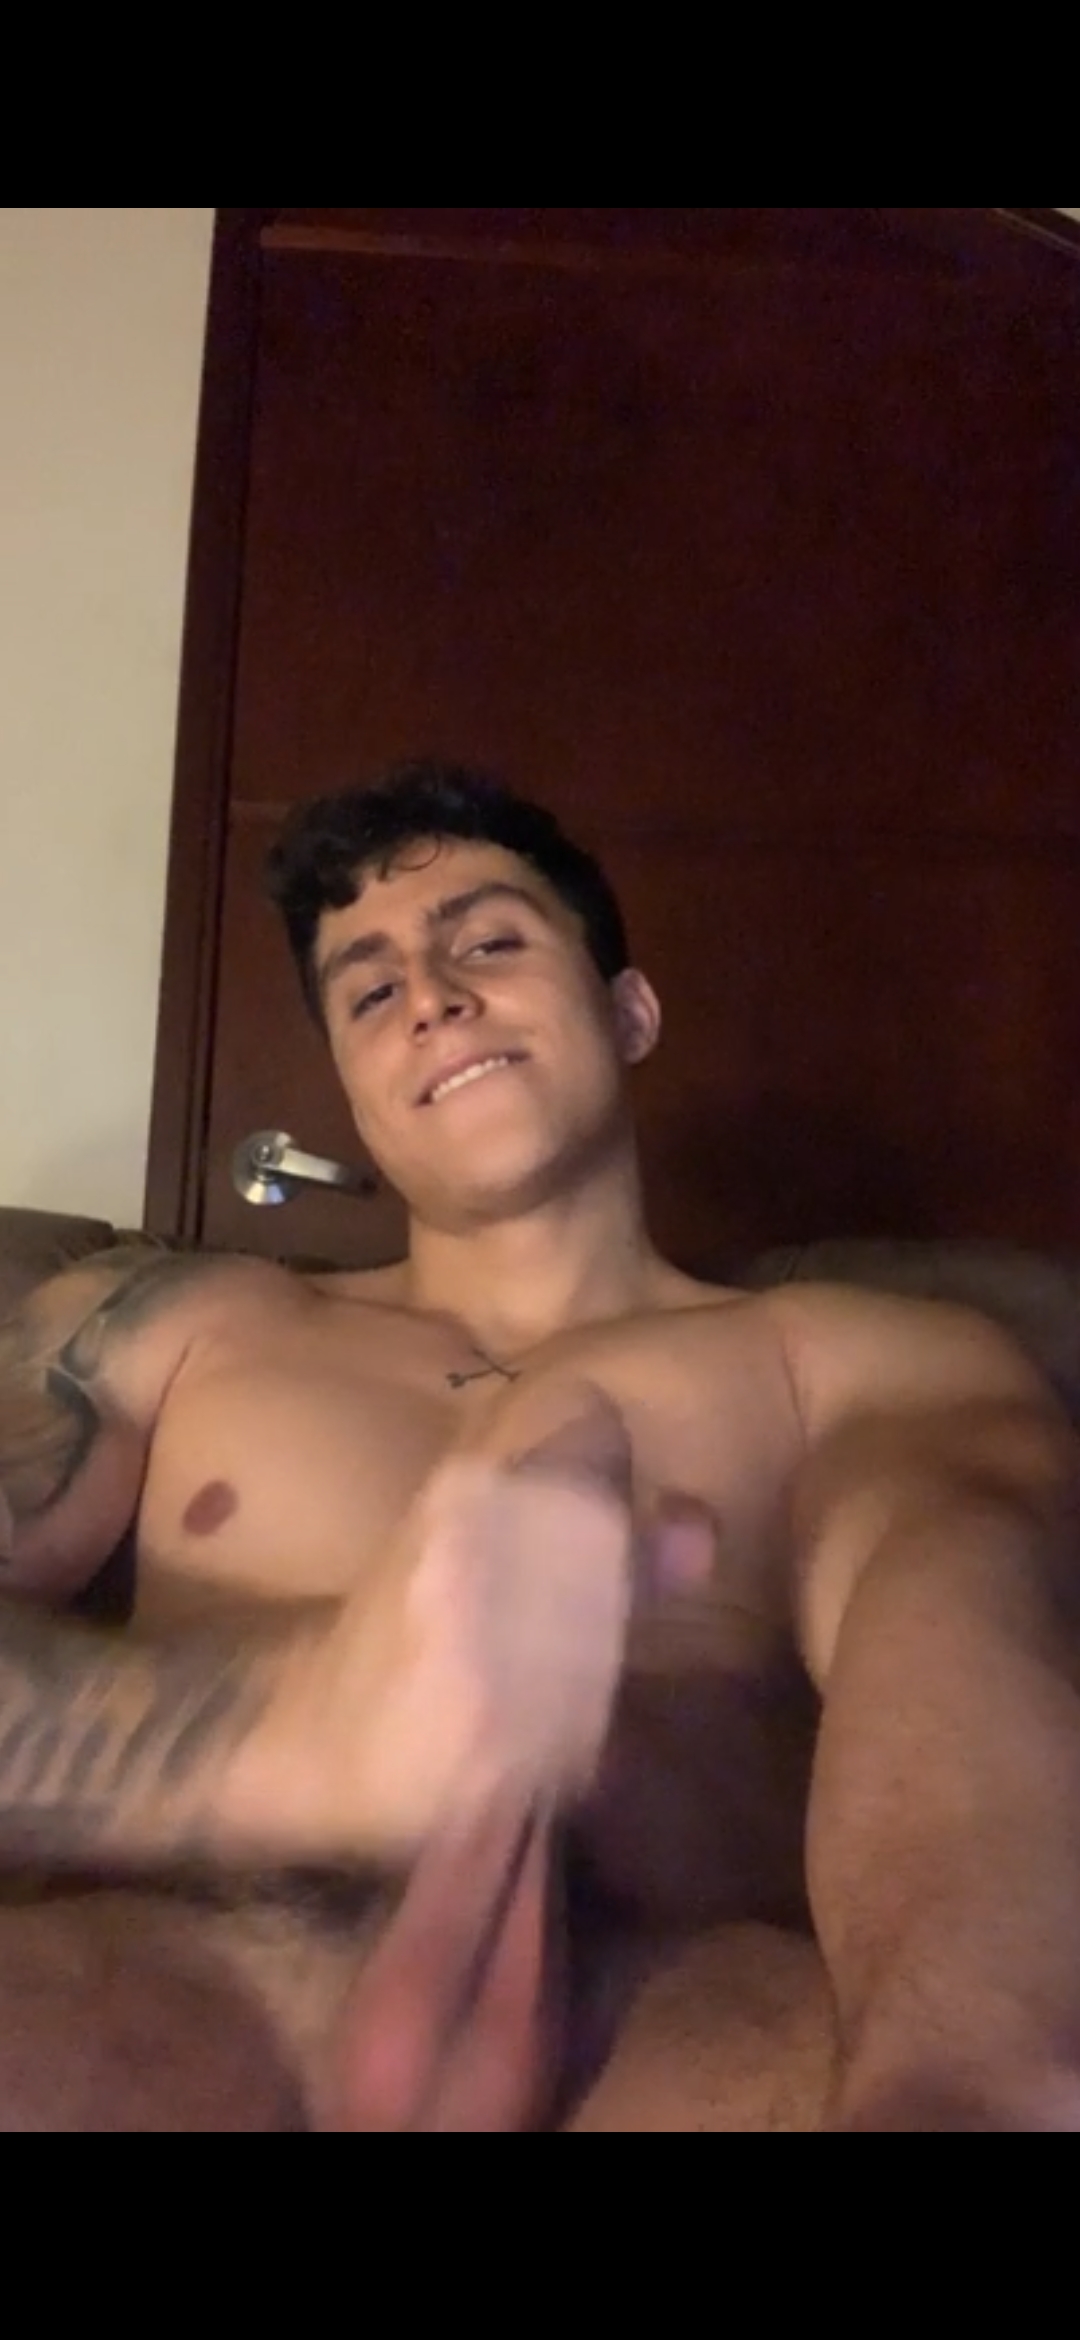 Latino stud wishes U Merry Christmas cumming all over his abs